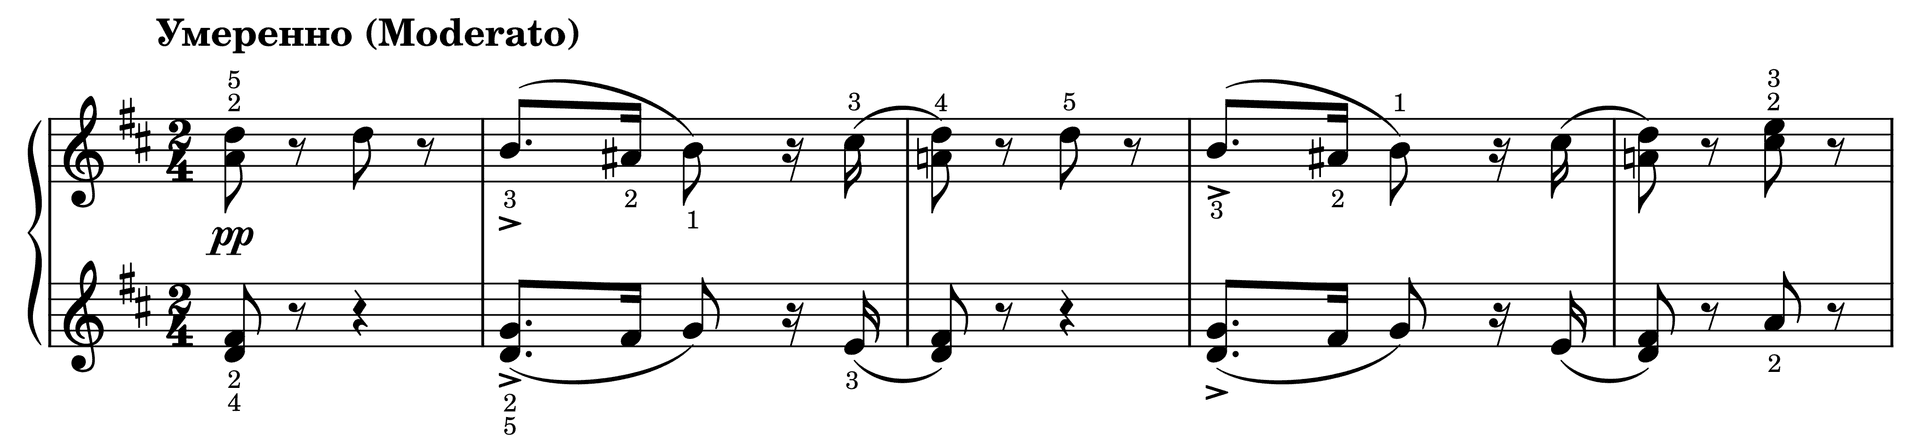 Excerpt of March of the Wooden Soldiers Op. 39, No. 5